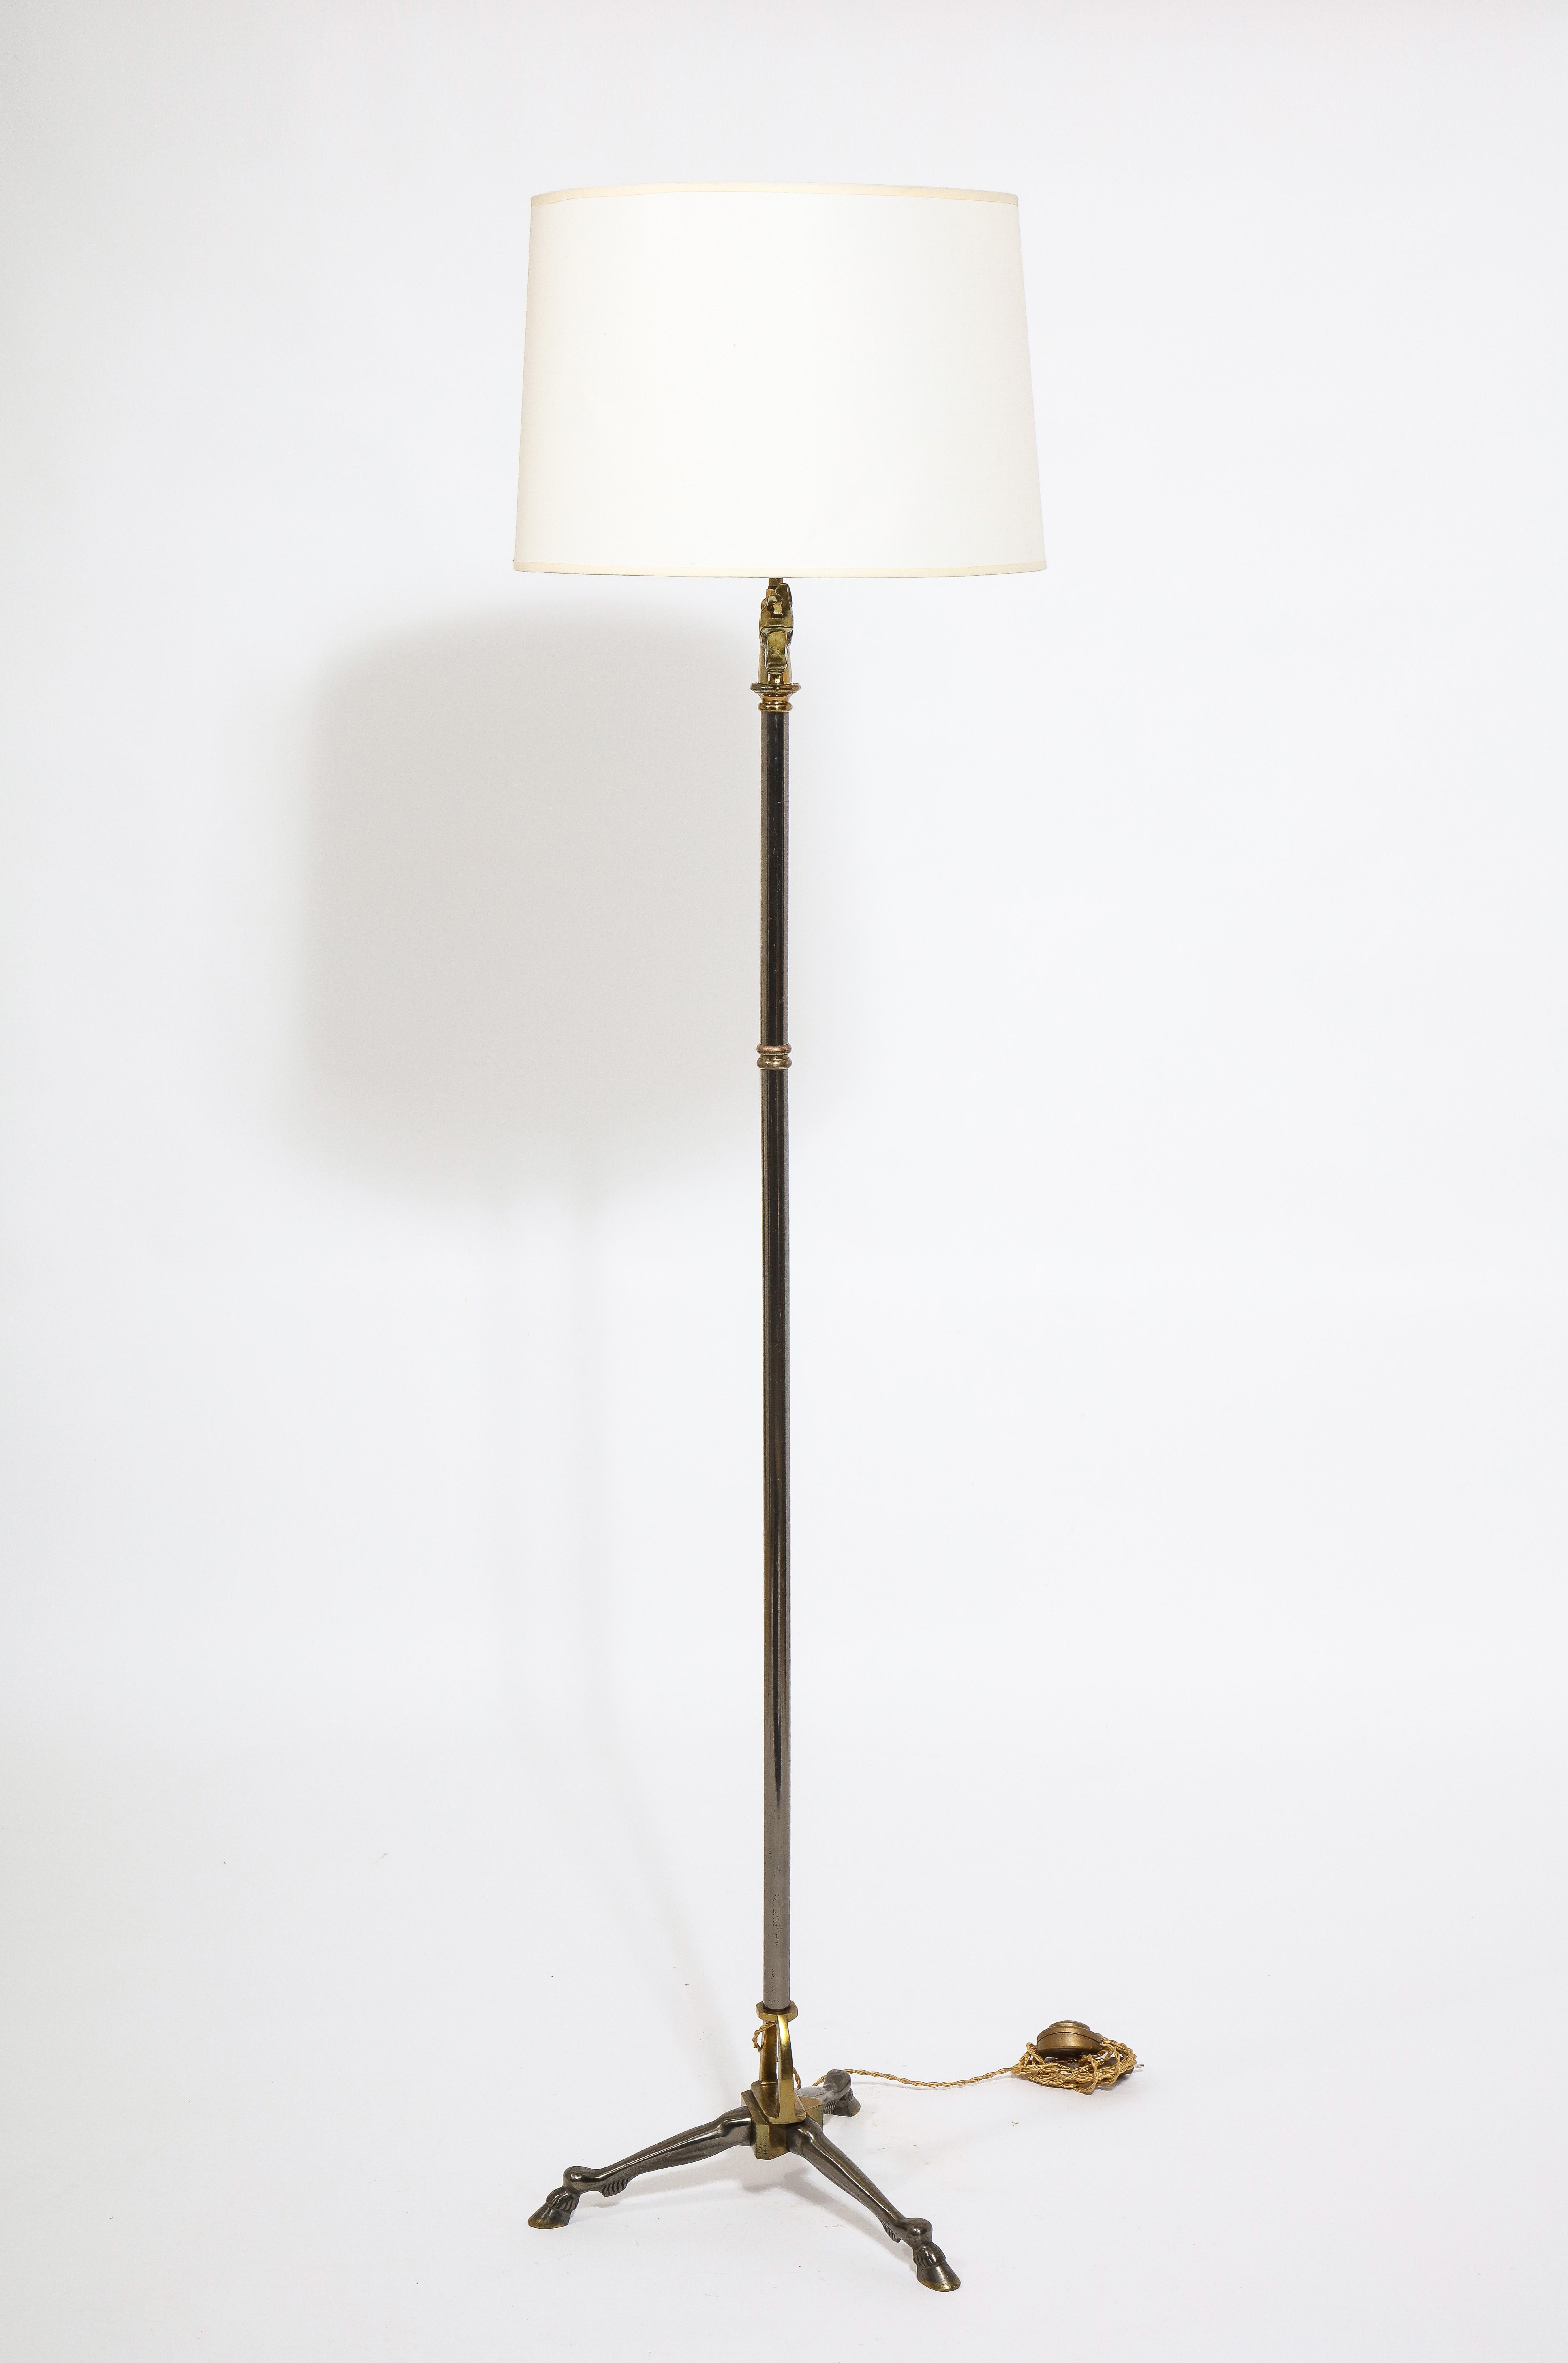 Exceptional neo-classical tripod floor lamp by Maison Jansen. Equestrian themed bronze and gunmetal finish. Rare piece. Wired for use in the US. 
Pole is height adjustable from 5.25ft to 6.9ft.
The lamp will sell without the shade.
 